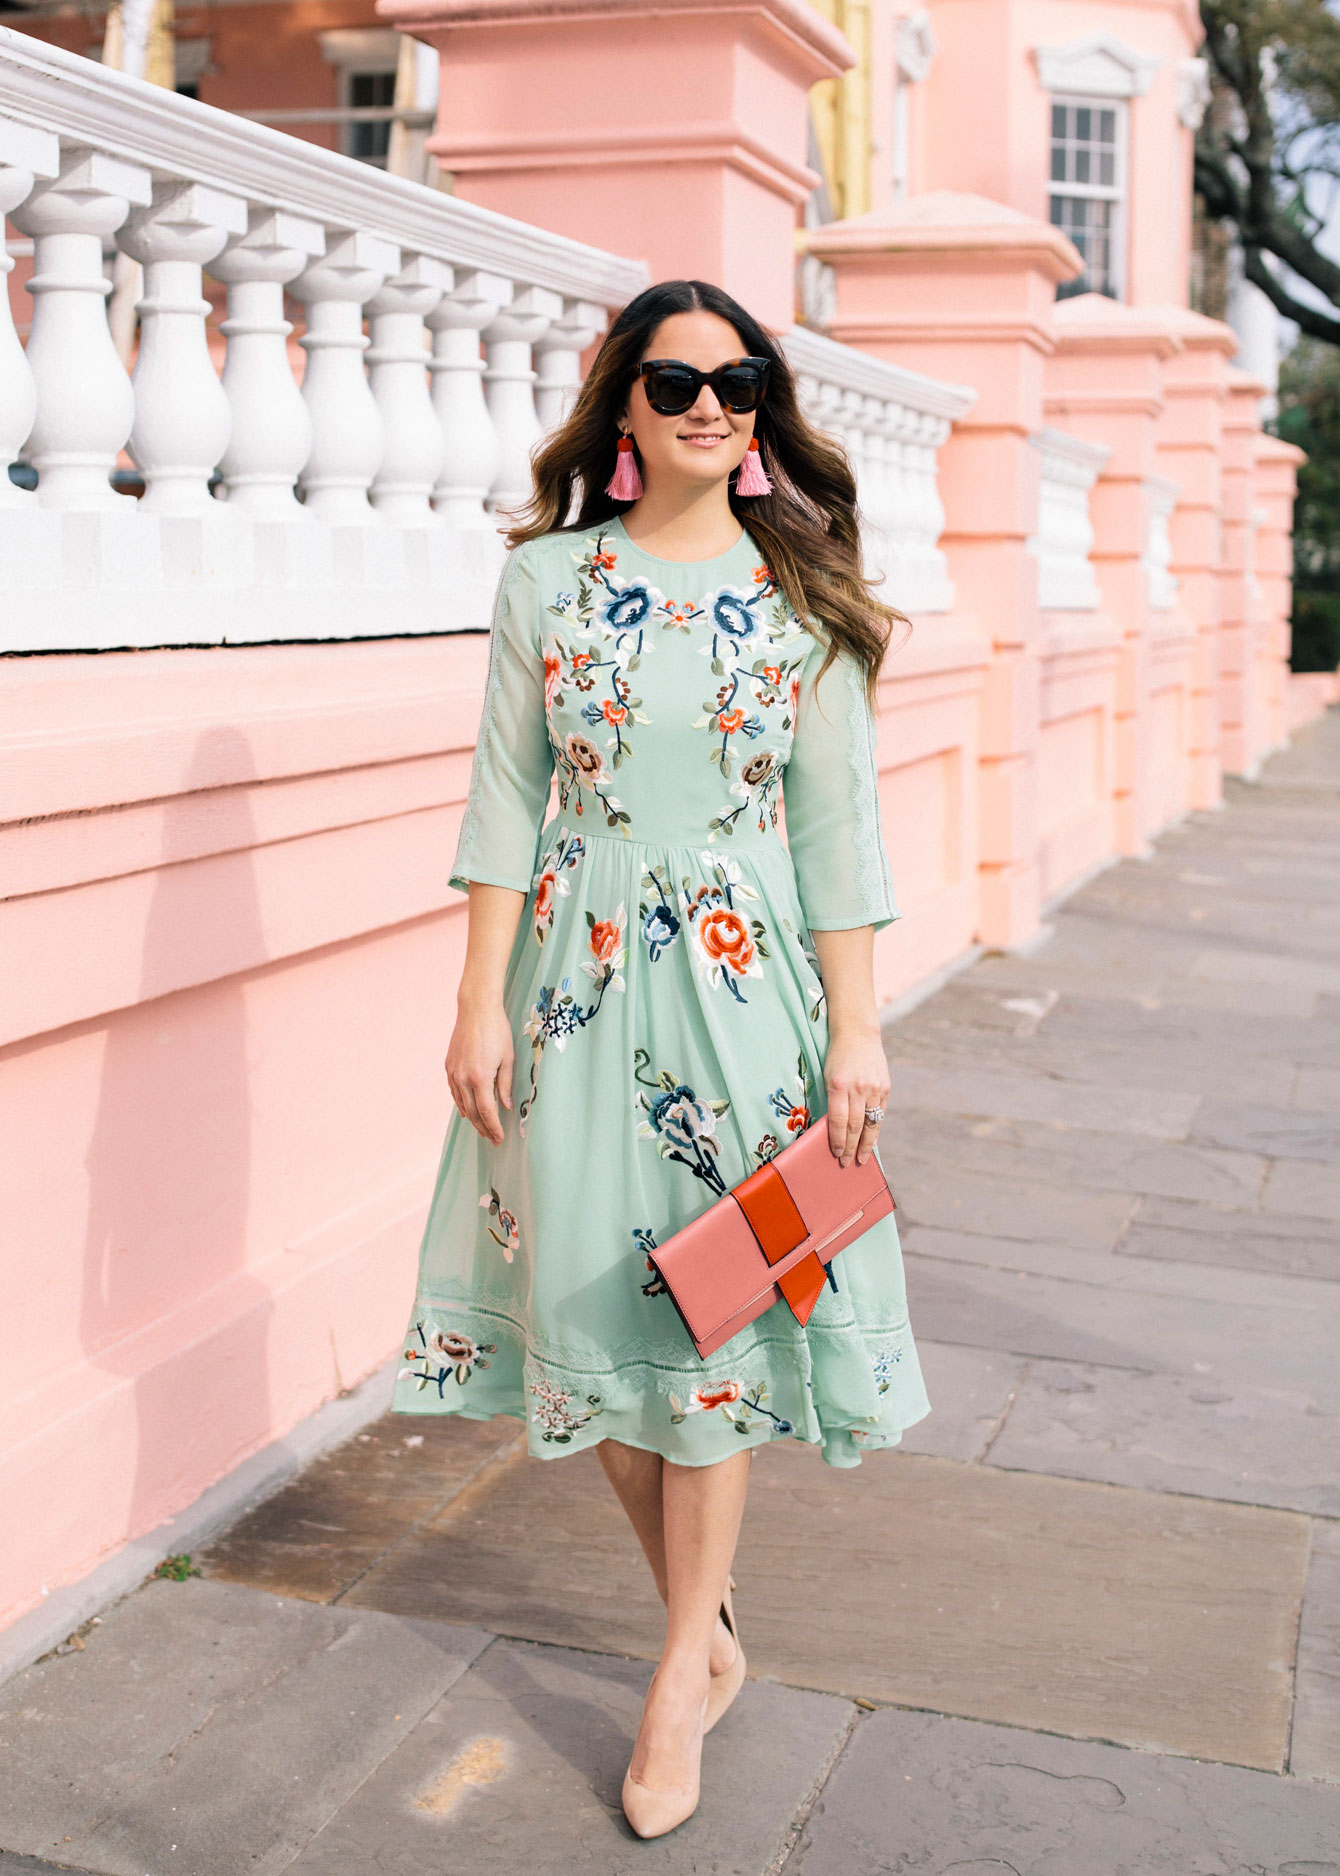 Green Floral Embroidered Midi Dress in Charleston